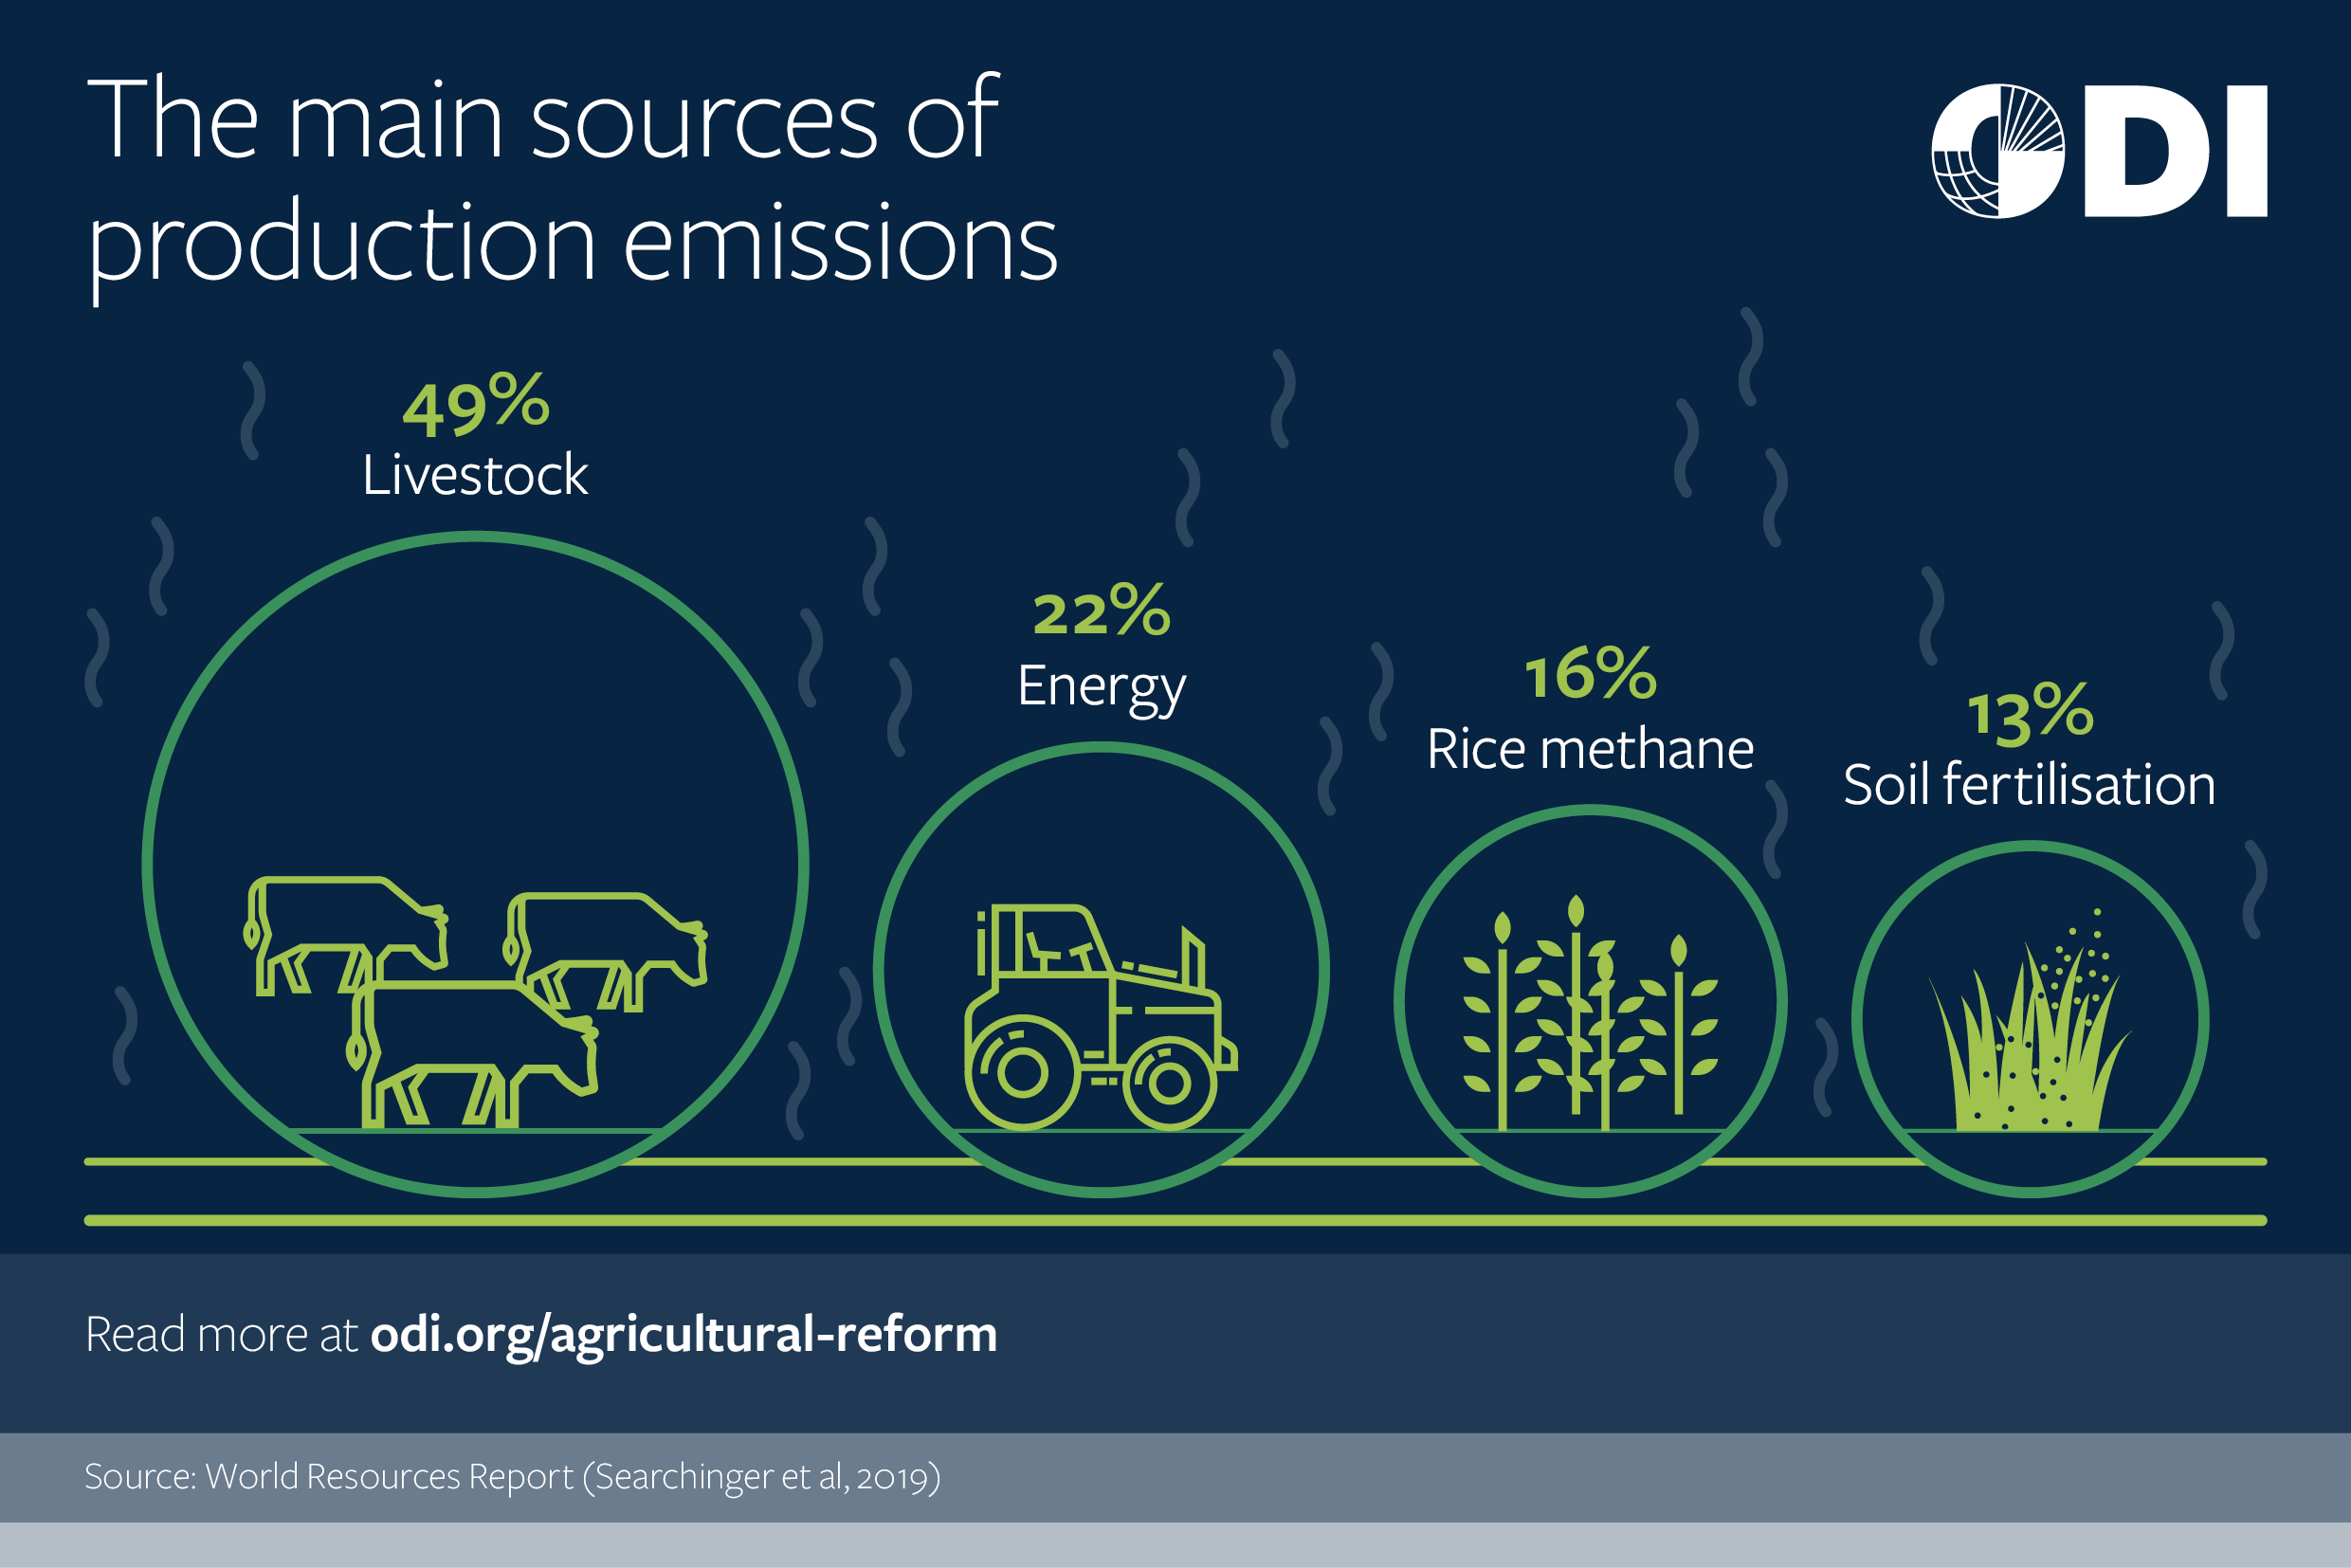 The main sources of production emissions.